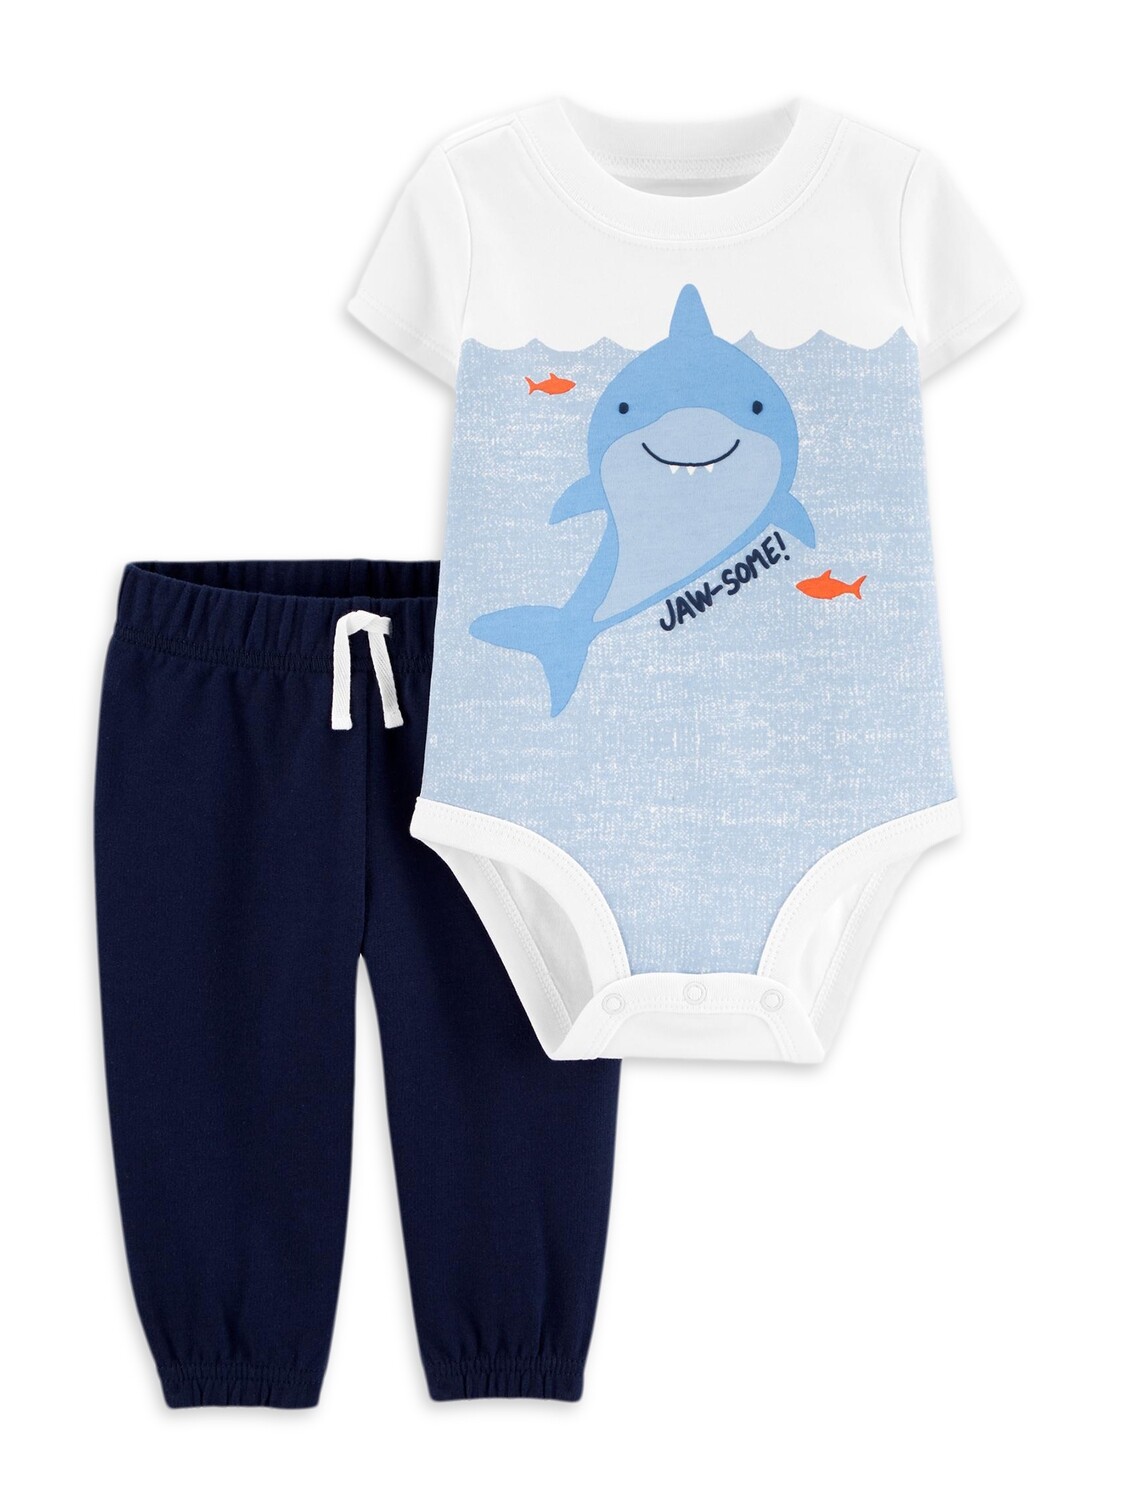 Baby Boy Onesie and Pants Outfit